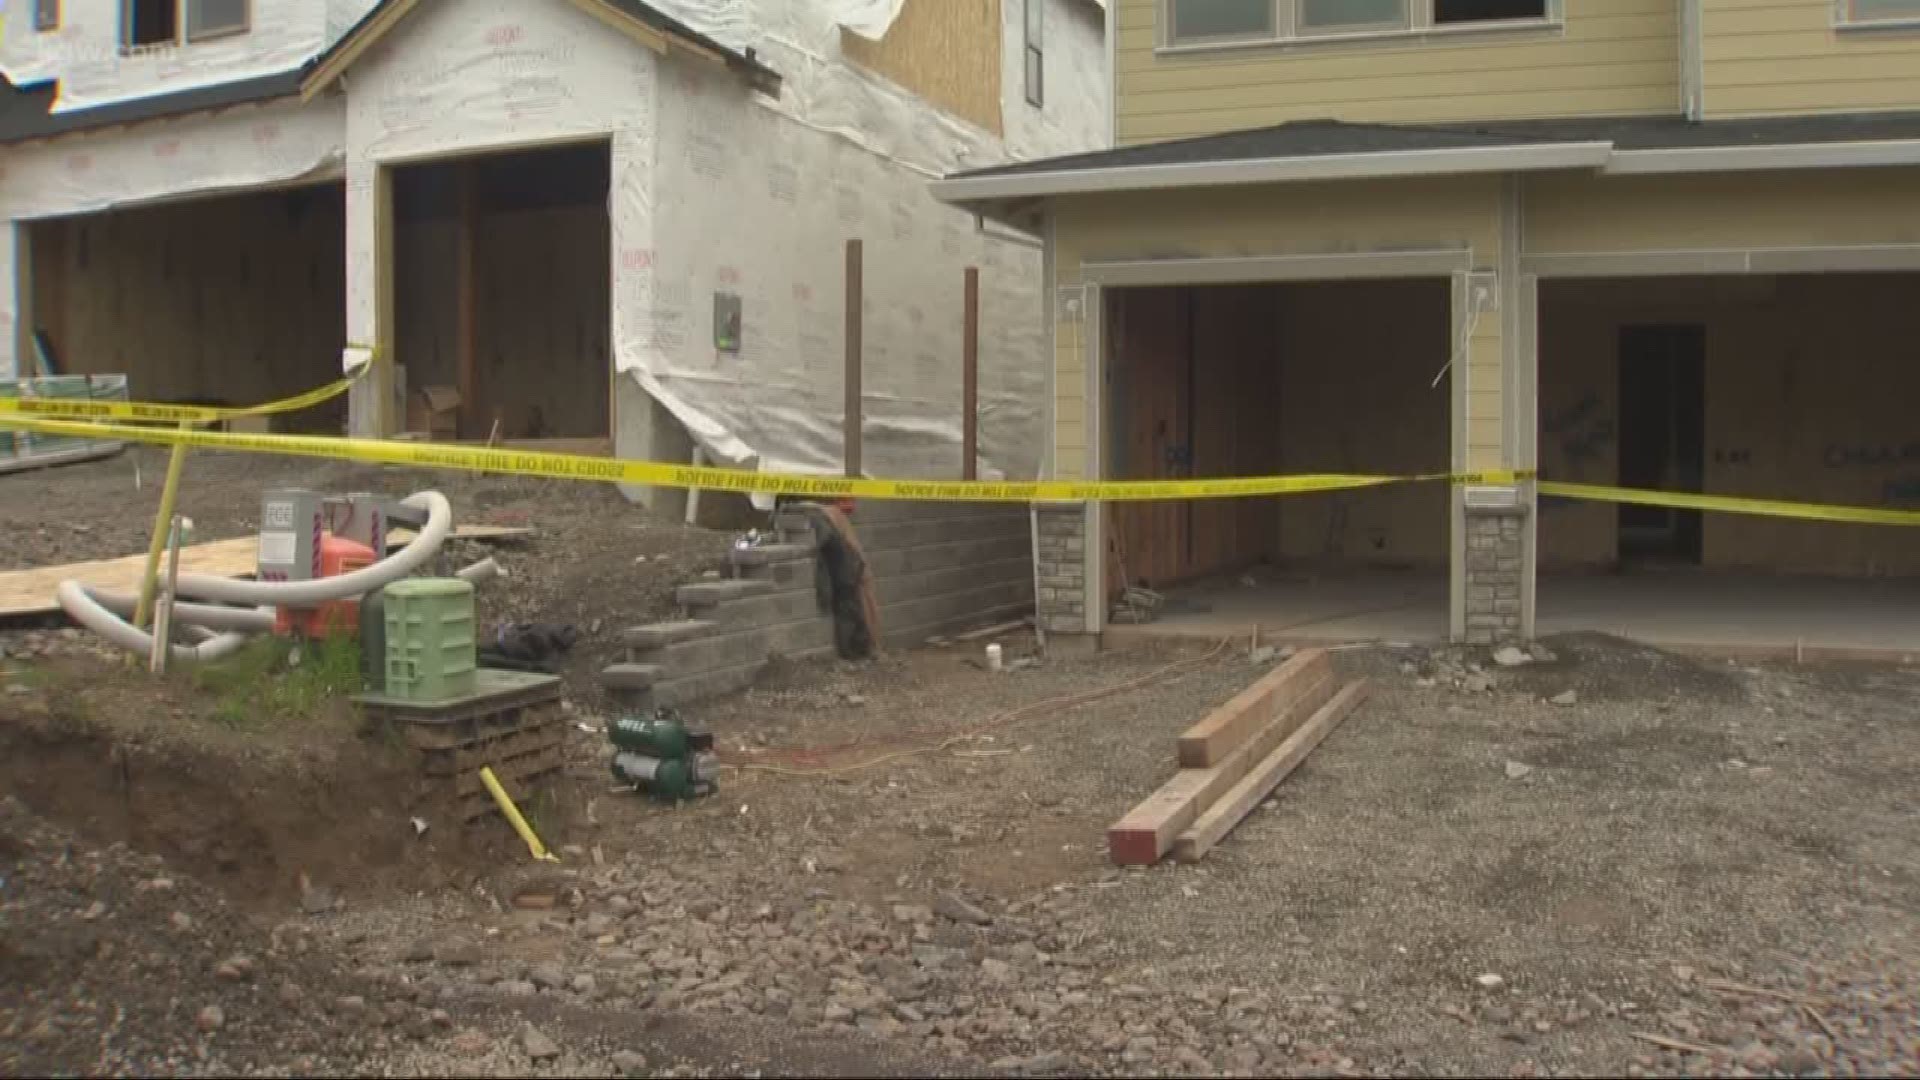 A construction worker was flown to the hospital Friday with multiple injuries after a fellow worker "just snapped" and started shooting him with a nail gun.